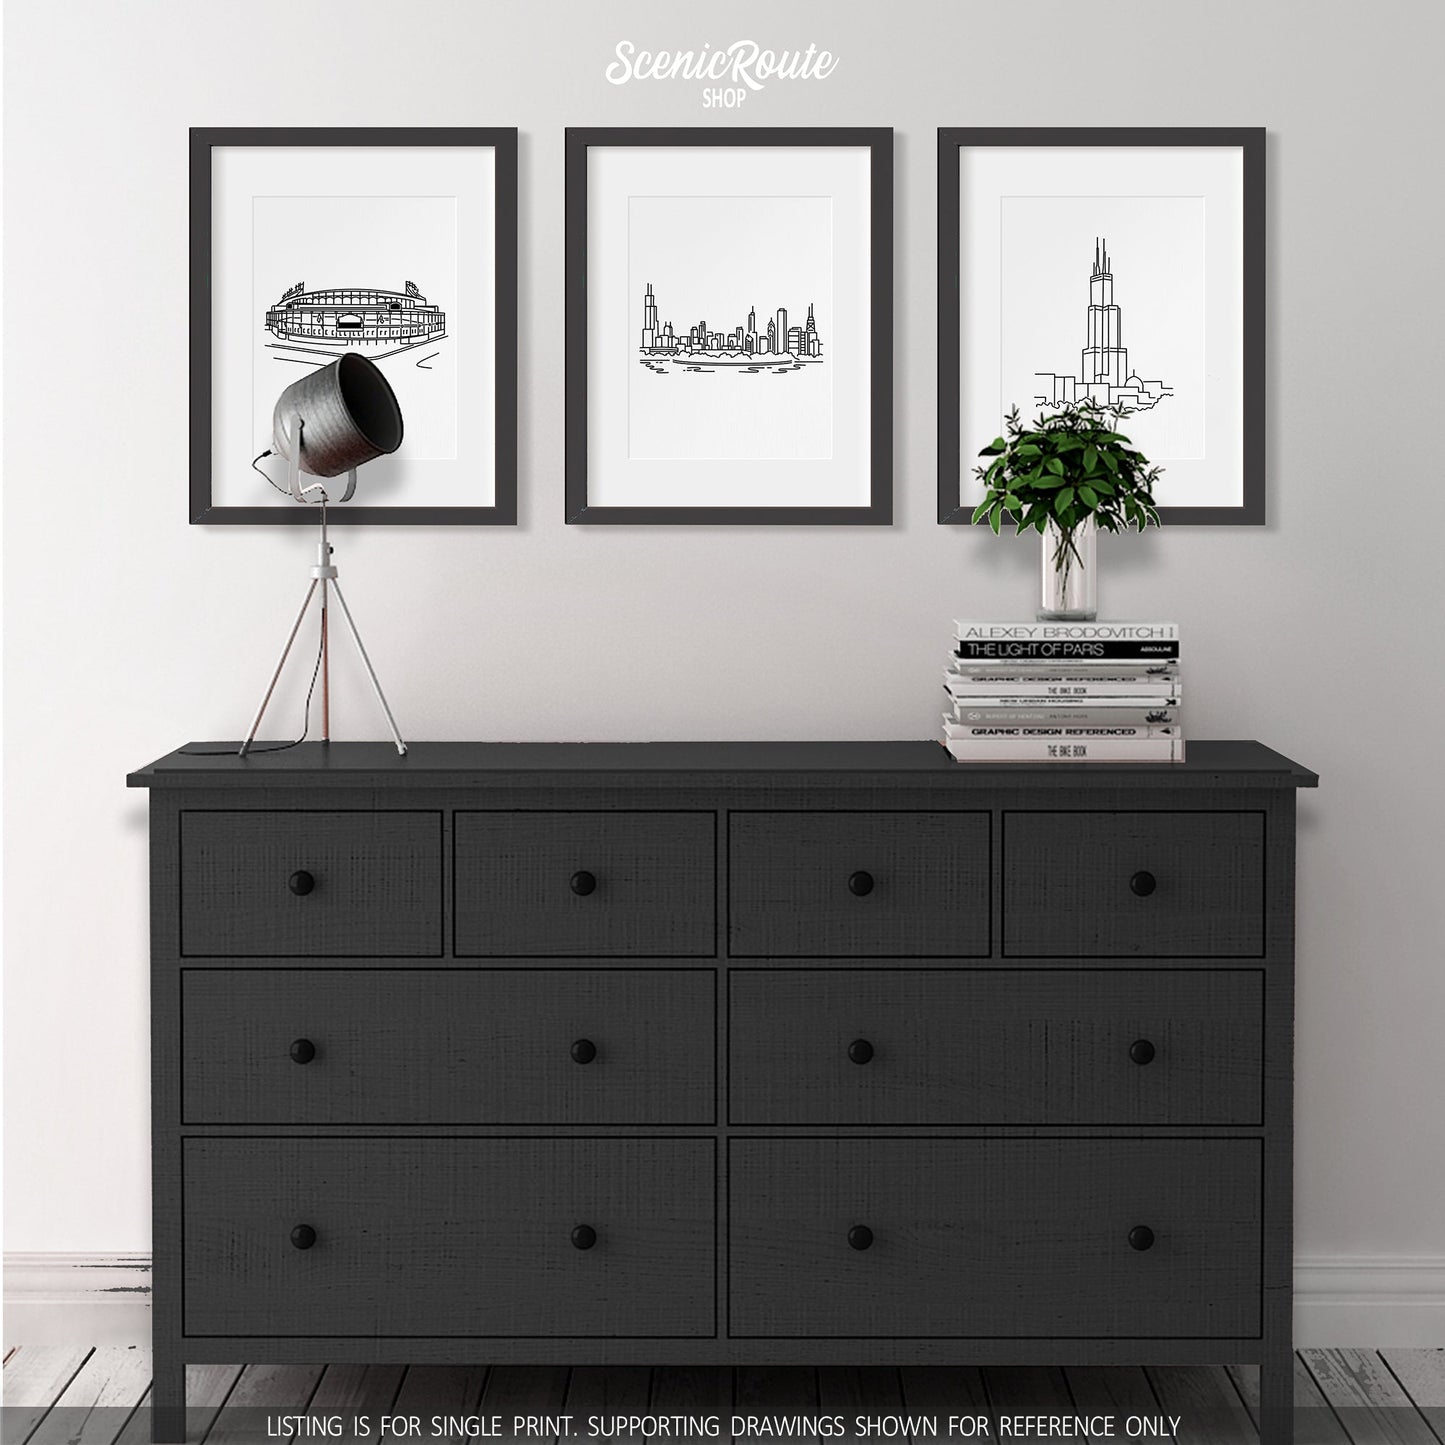 A group of three framed drawings on a wall above a dresser with books and a plant. The line art drawings include Wrigley Field, the Chicago Skyline, and the Willis Tower